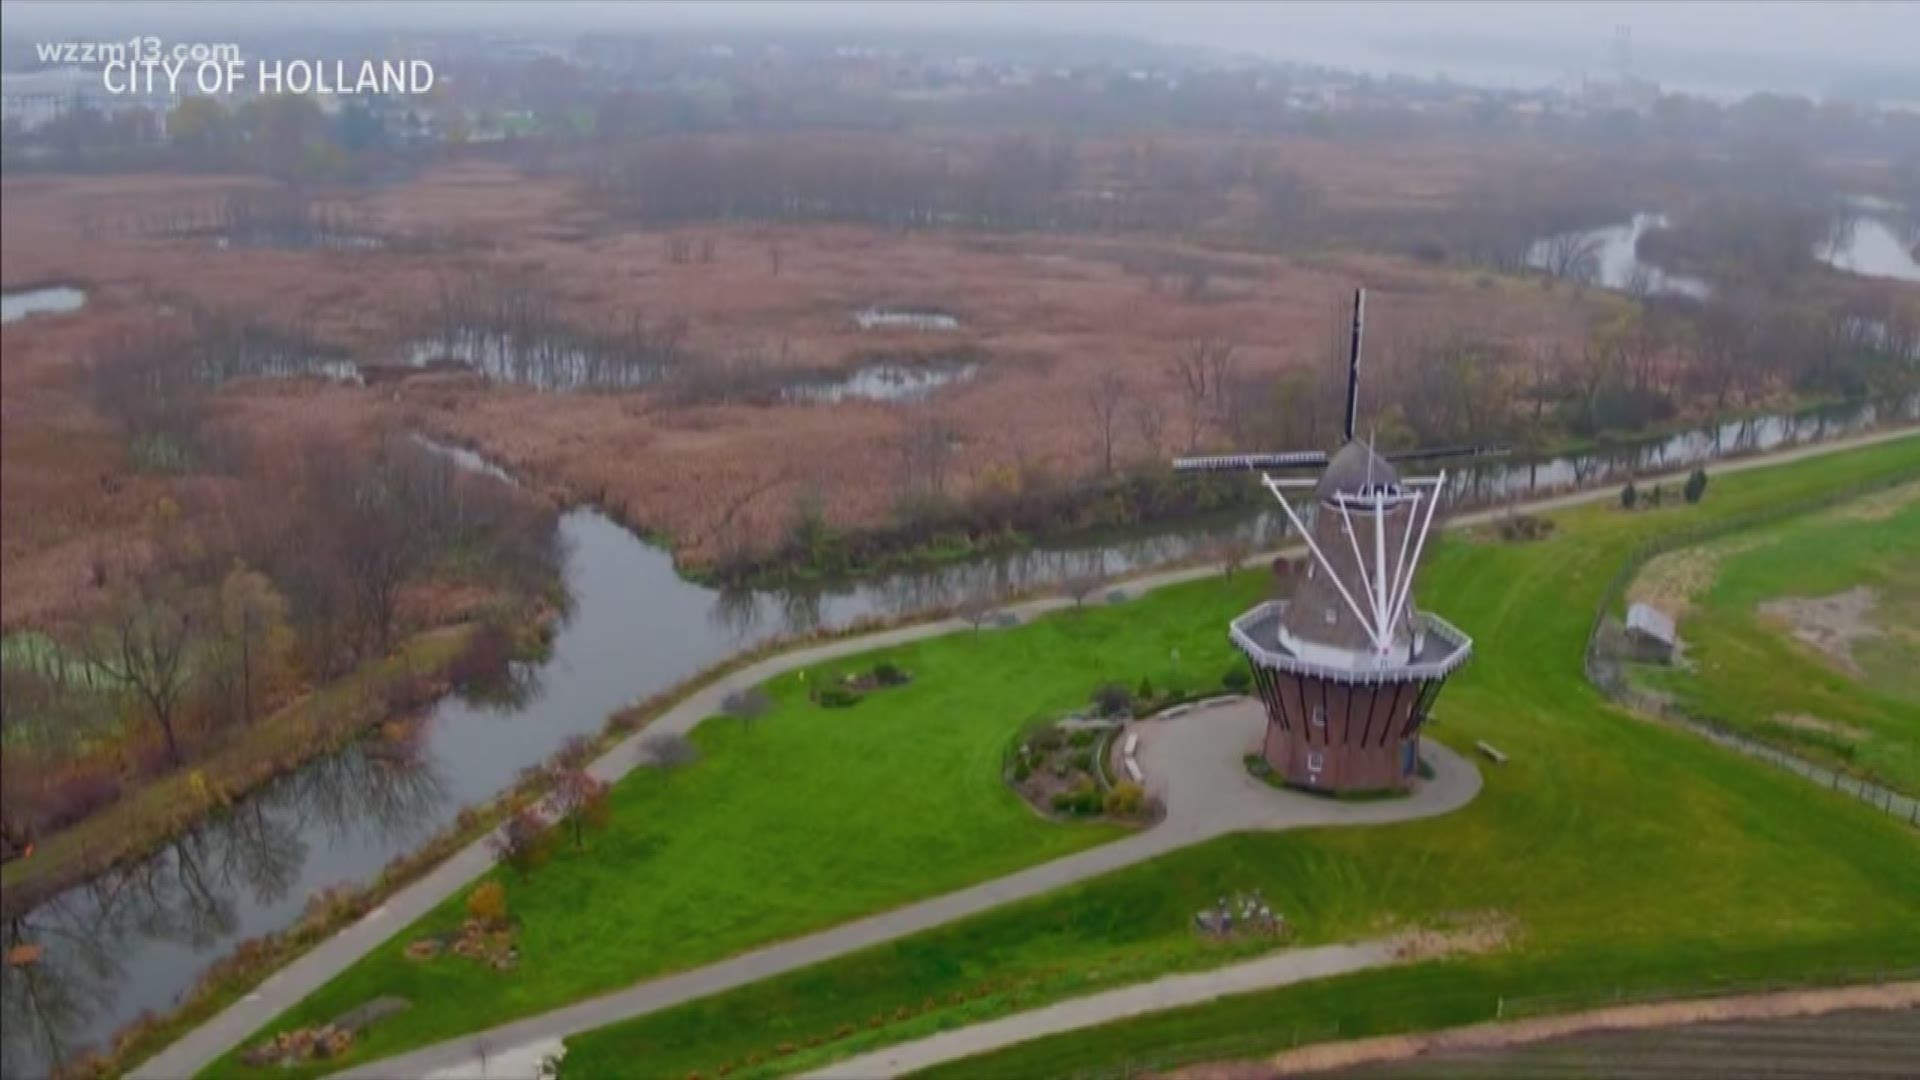 You can share your idea for Holland's waterfont